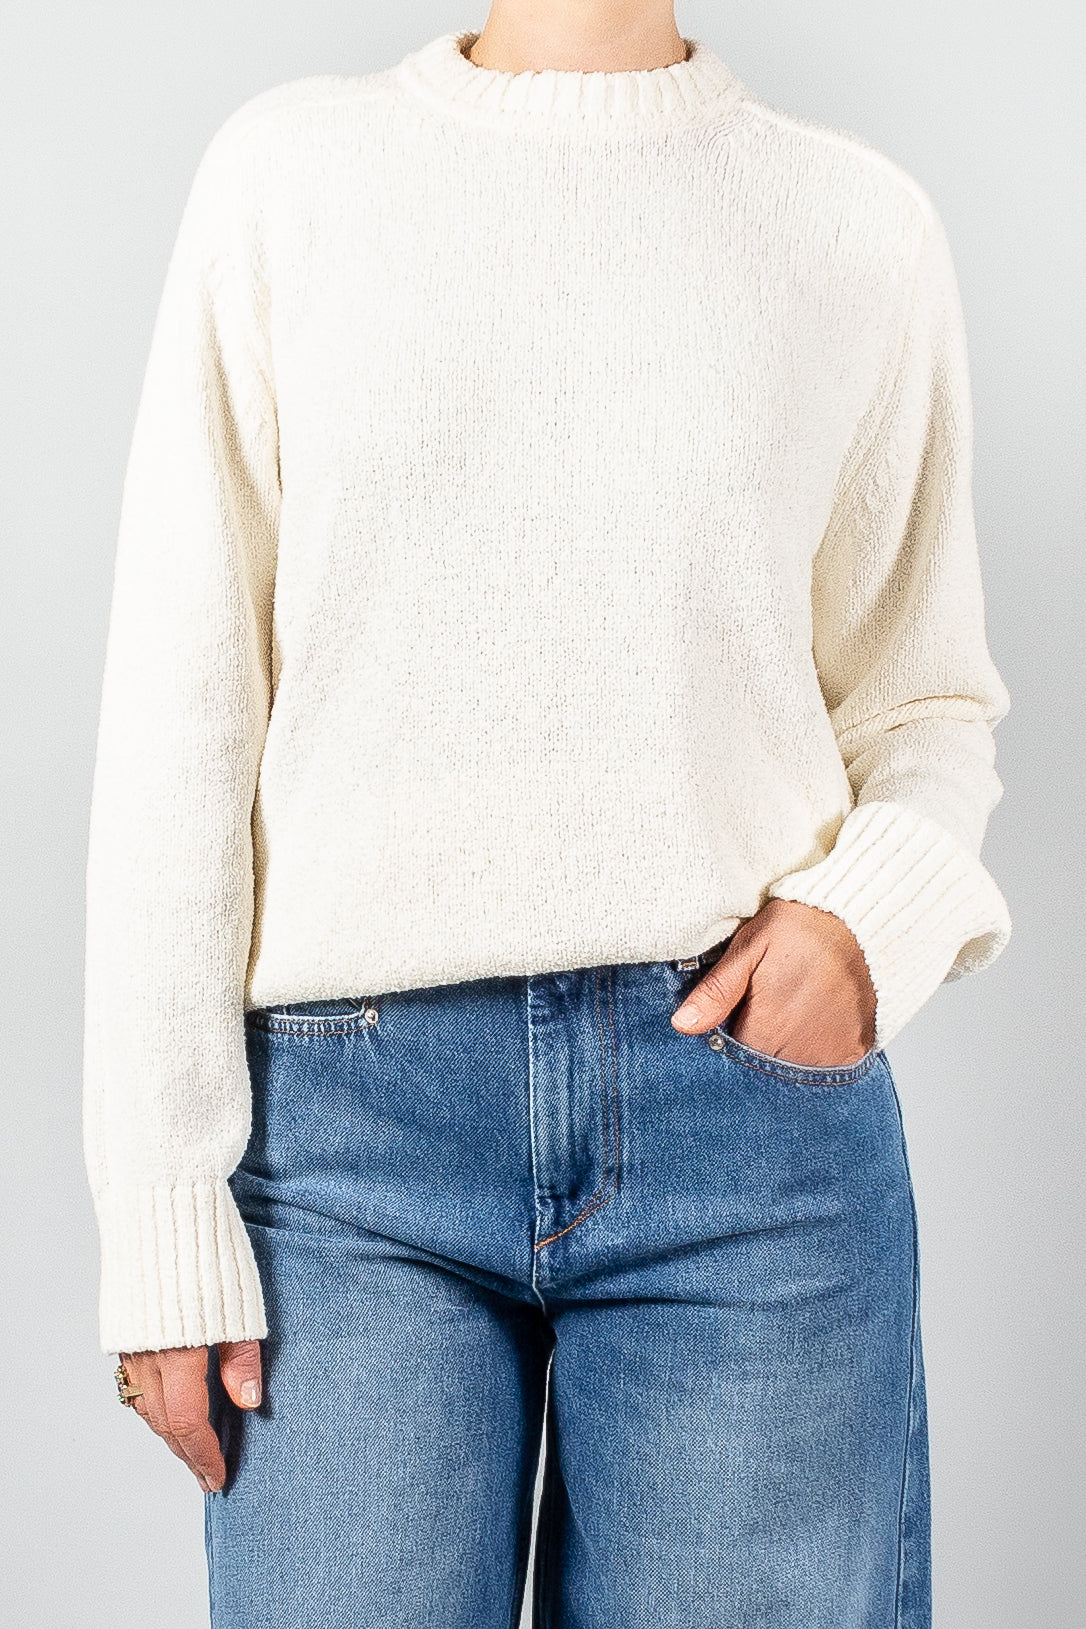 Loulou Studio Canillo Sweater-Knitwear-Misch-Boutique-Vancouver-Canada-misch.ca